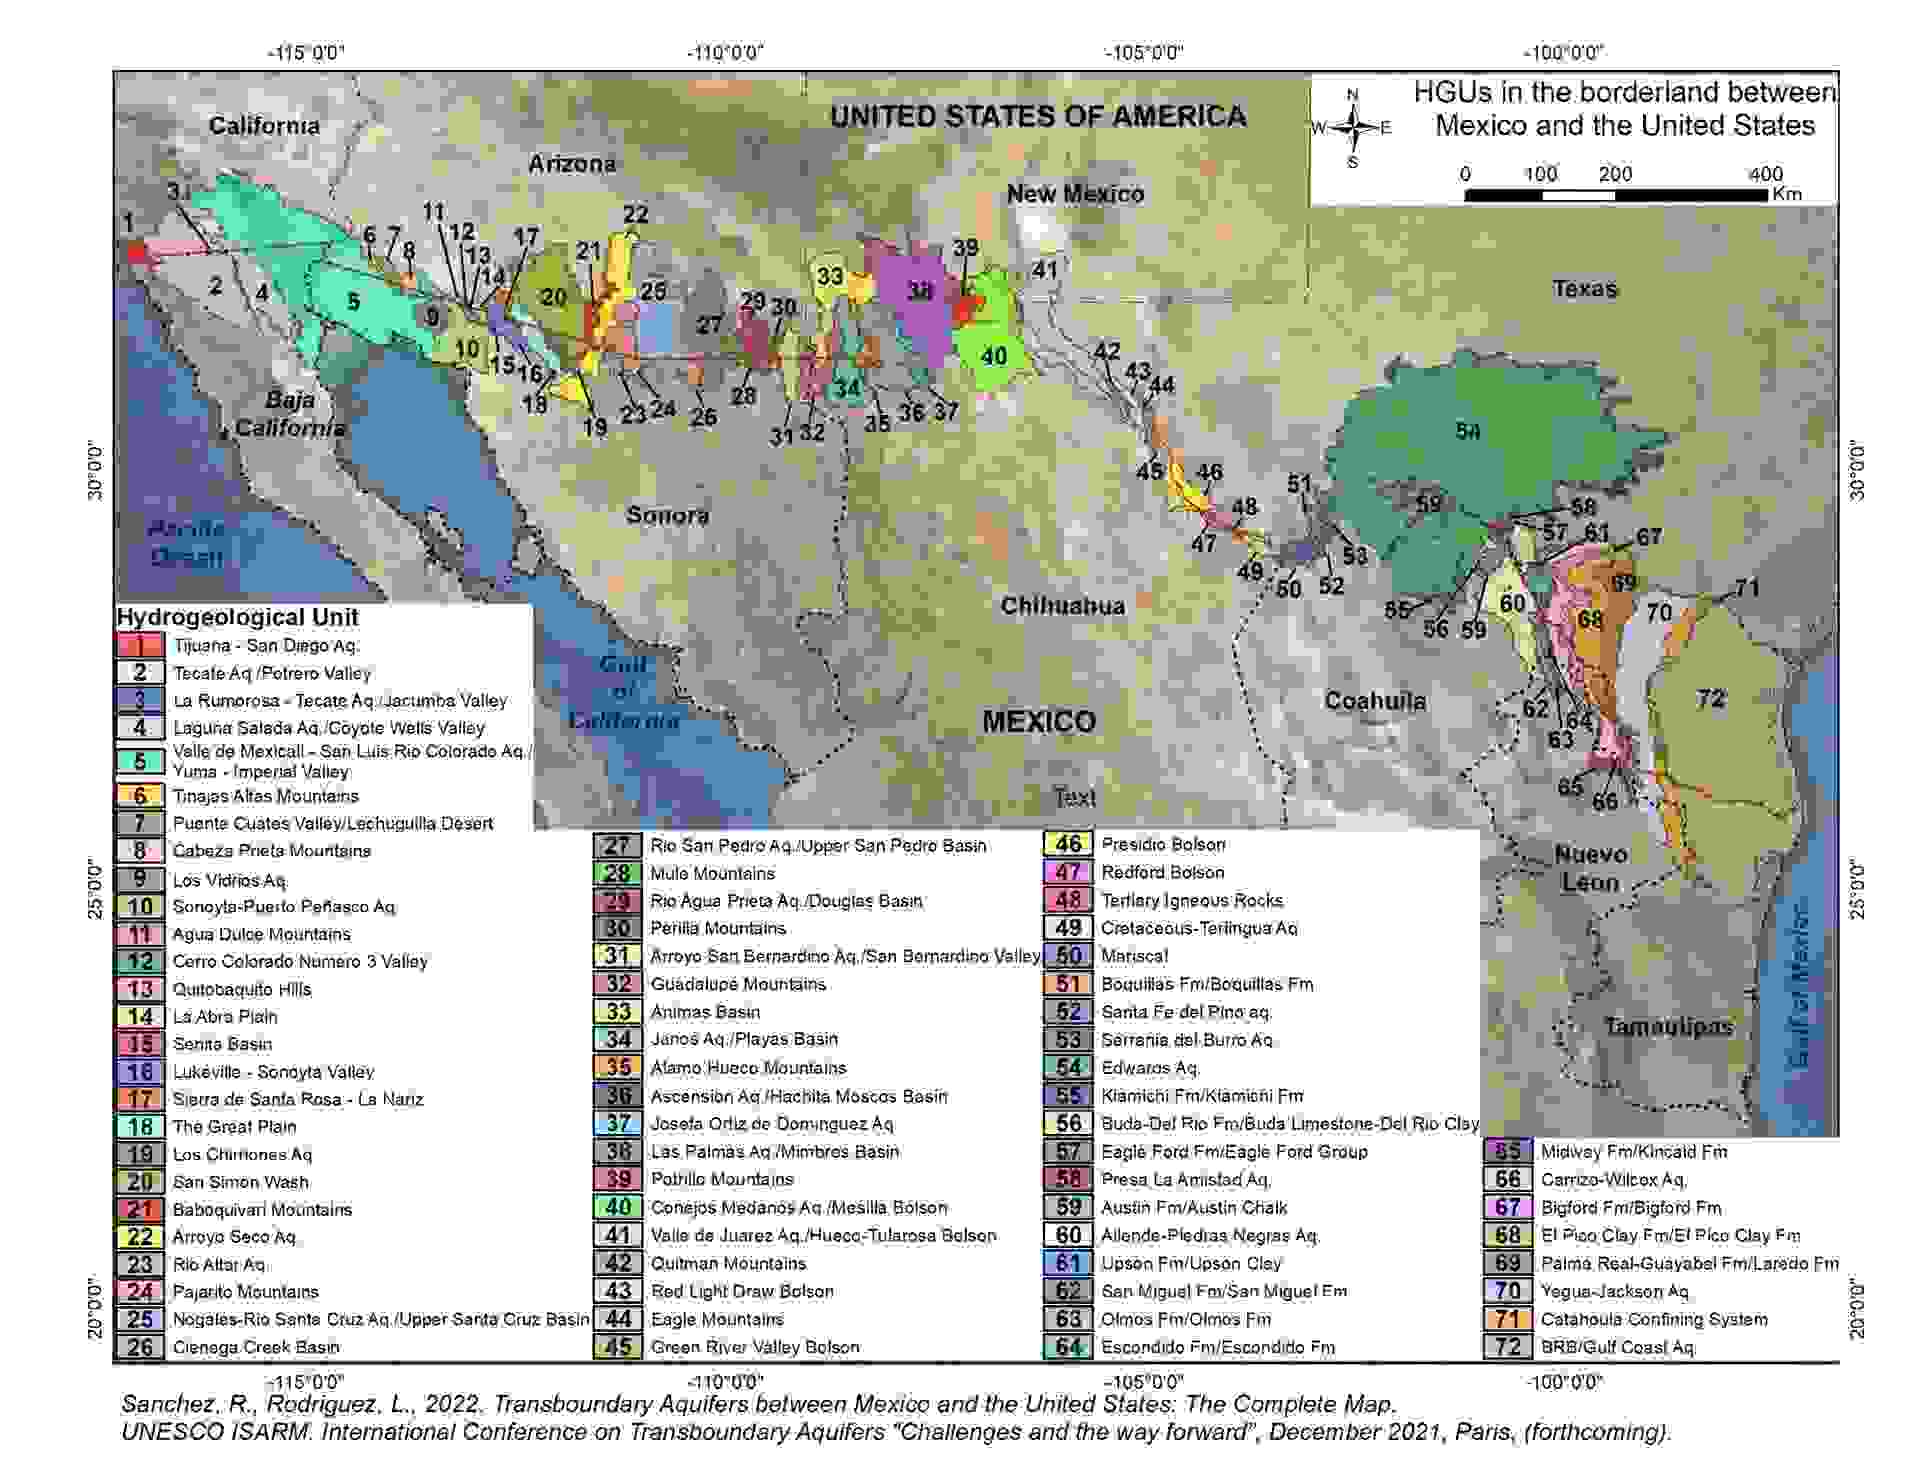 The first-ever complete map of the U.S.-Mexico transboundary aquifers.